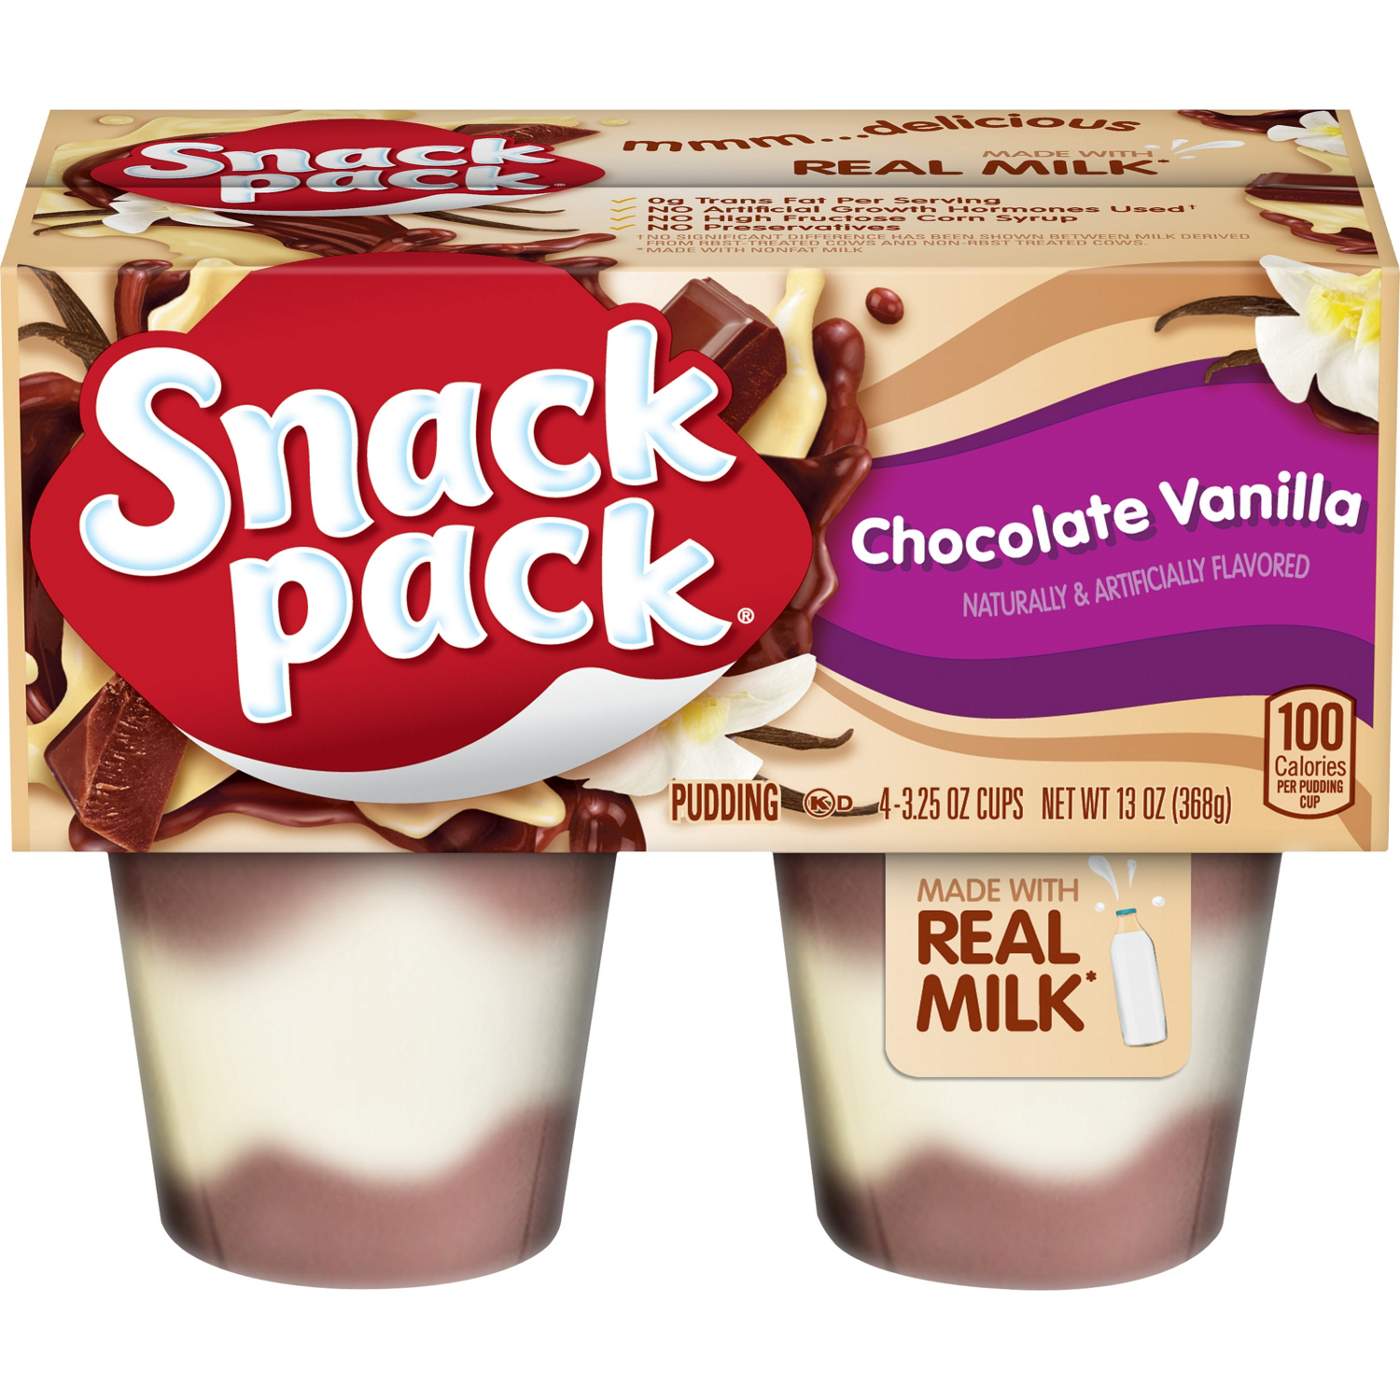 Snack Pack Chocolate Vanilla Pudding Cups; image 1 of 7